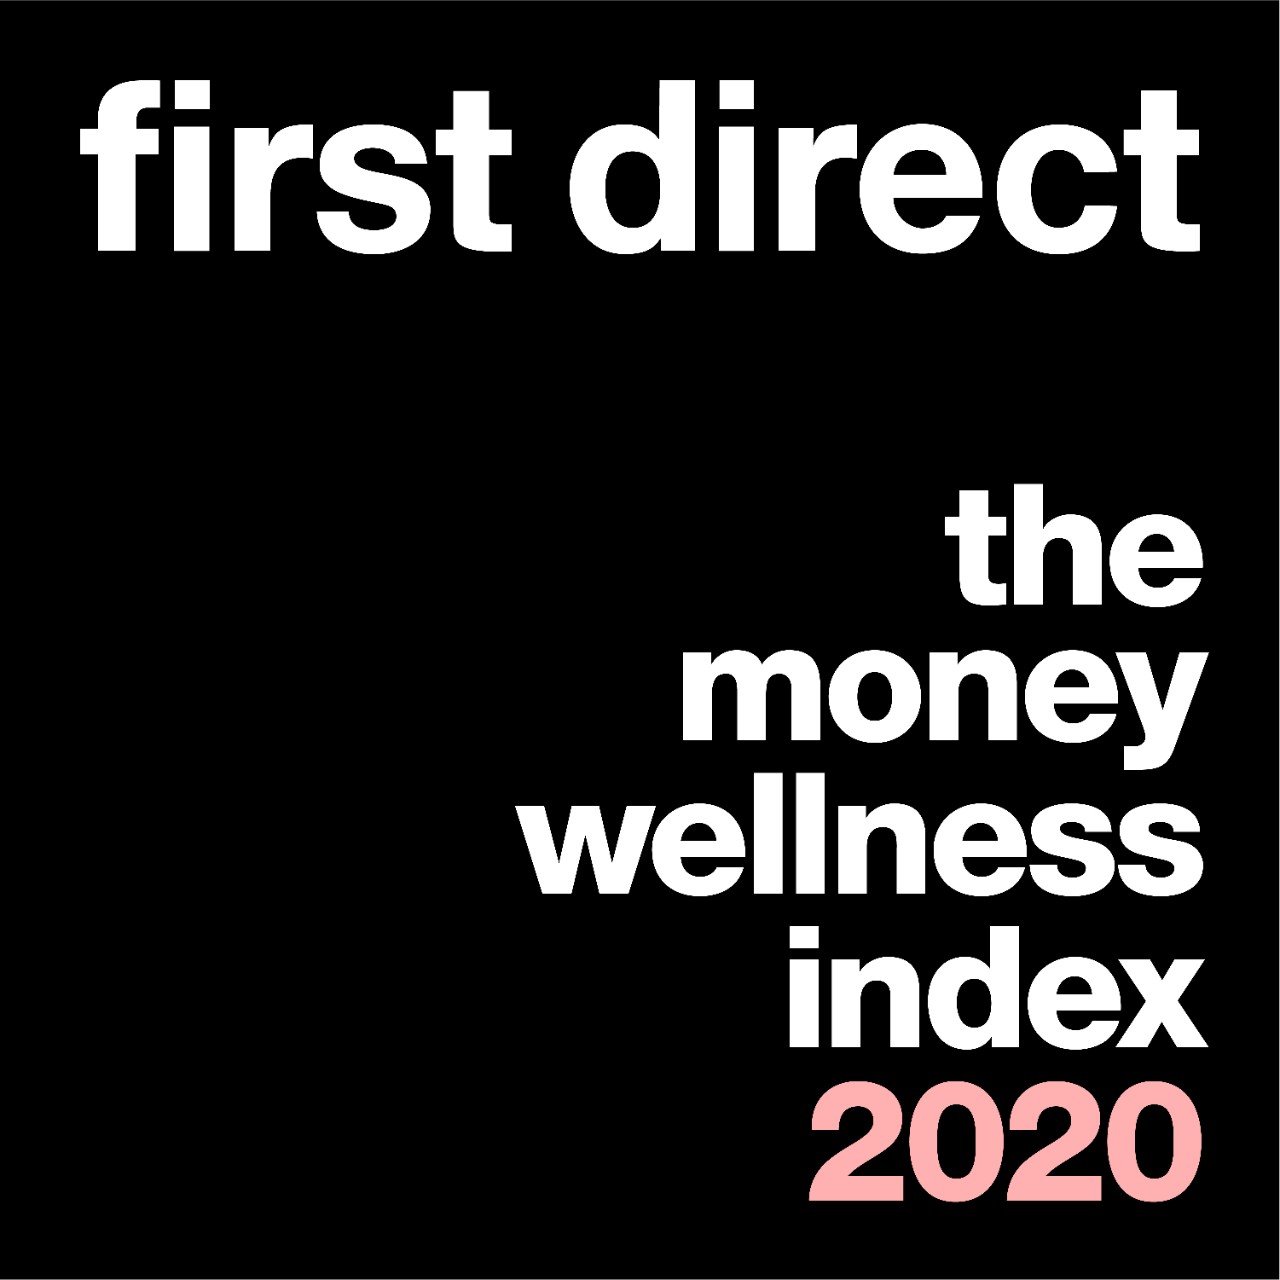 Money wellness index 2020 - find out more